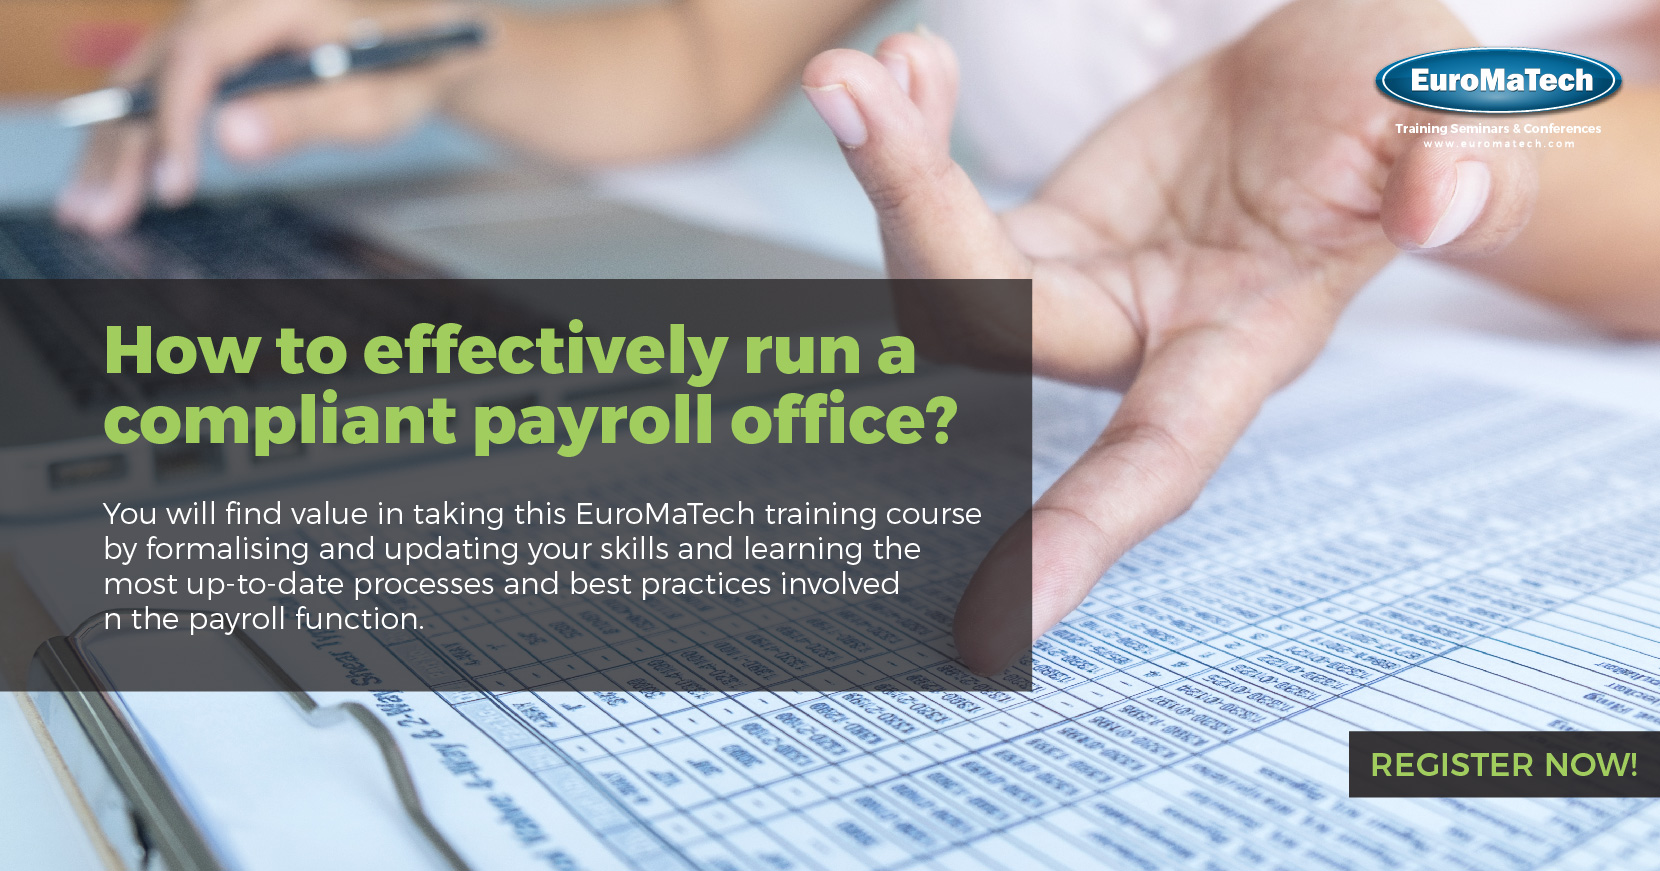 Payroll Management and Effective Payroll Controls Training Course